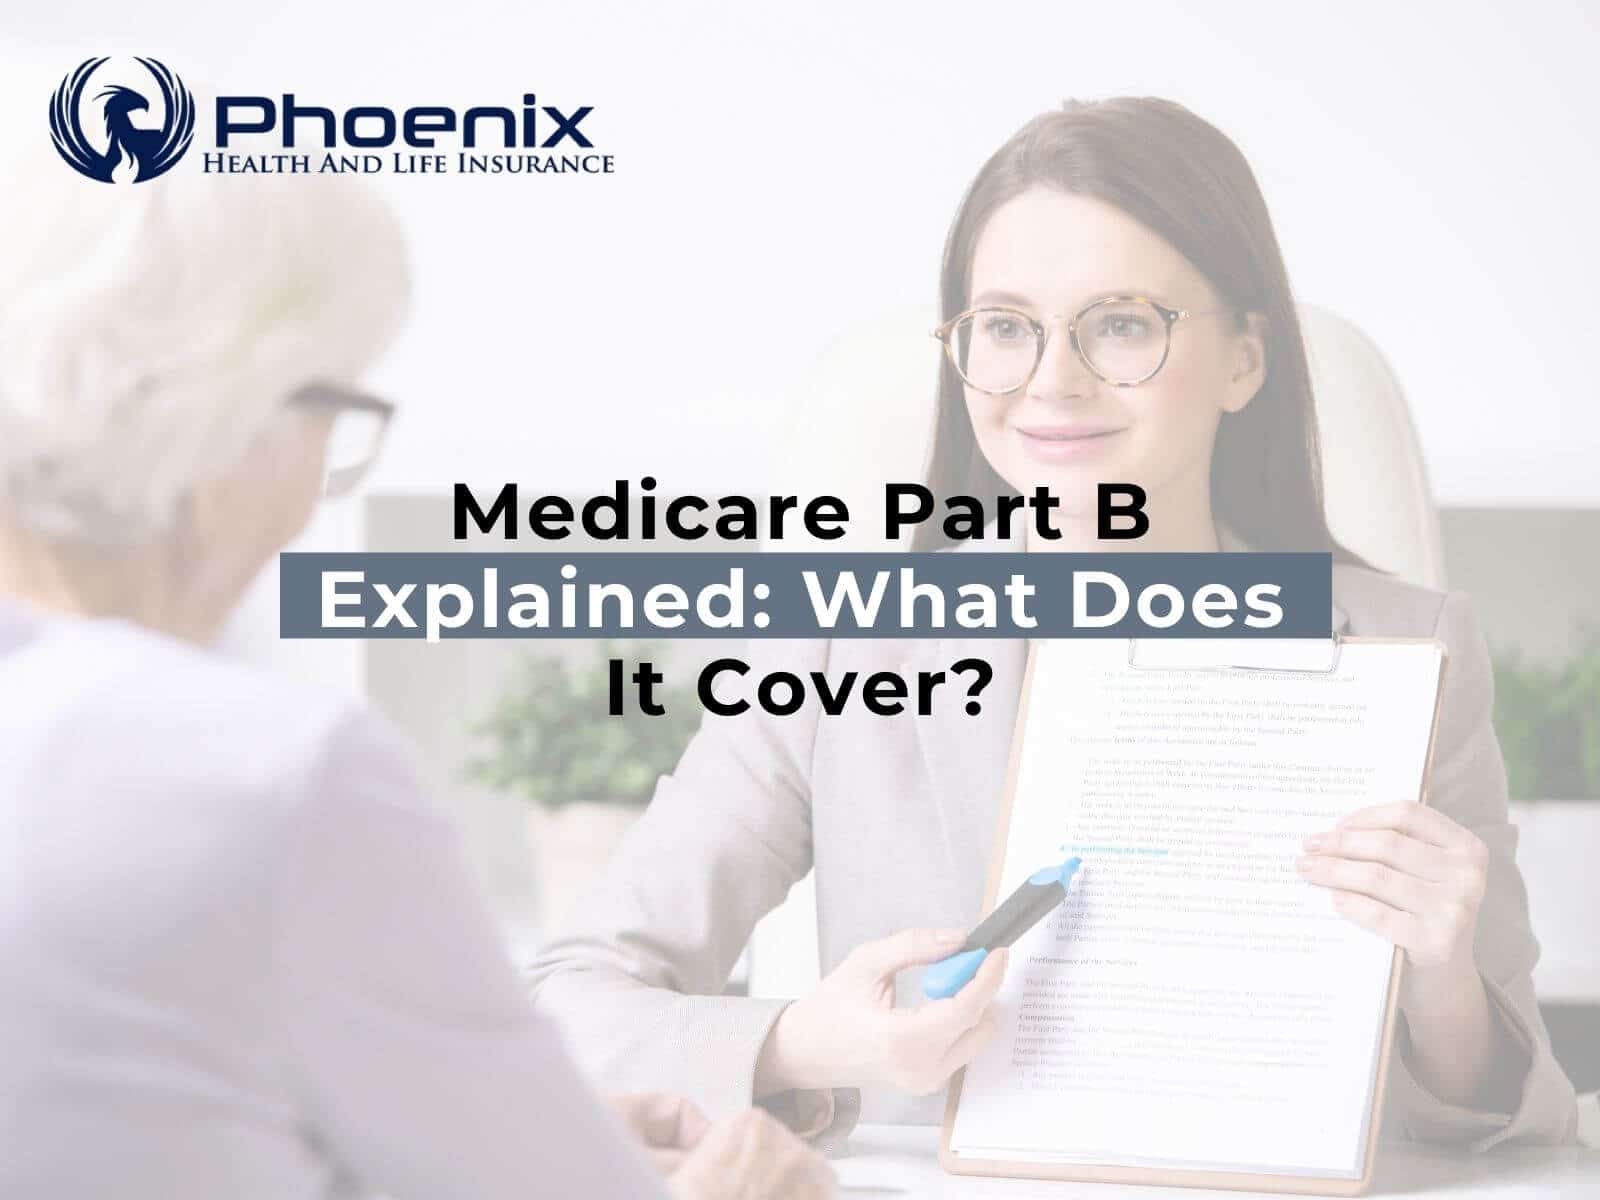 Medicare Part B Explained: What Does It Cover?